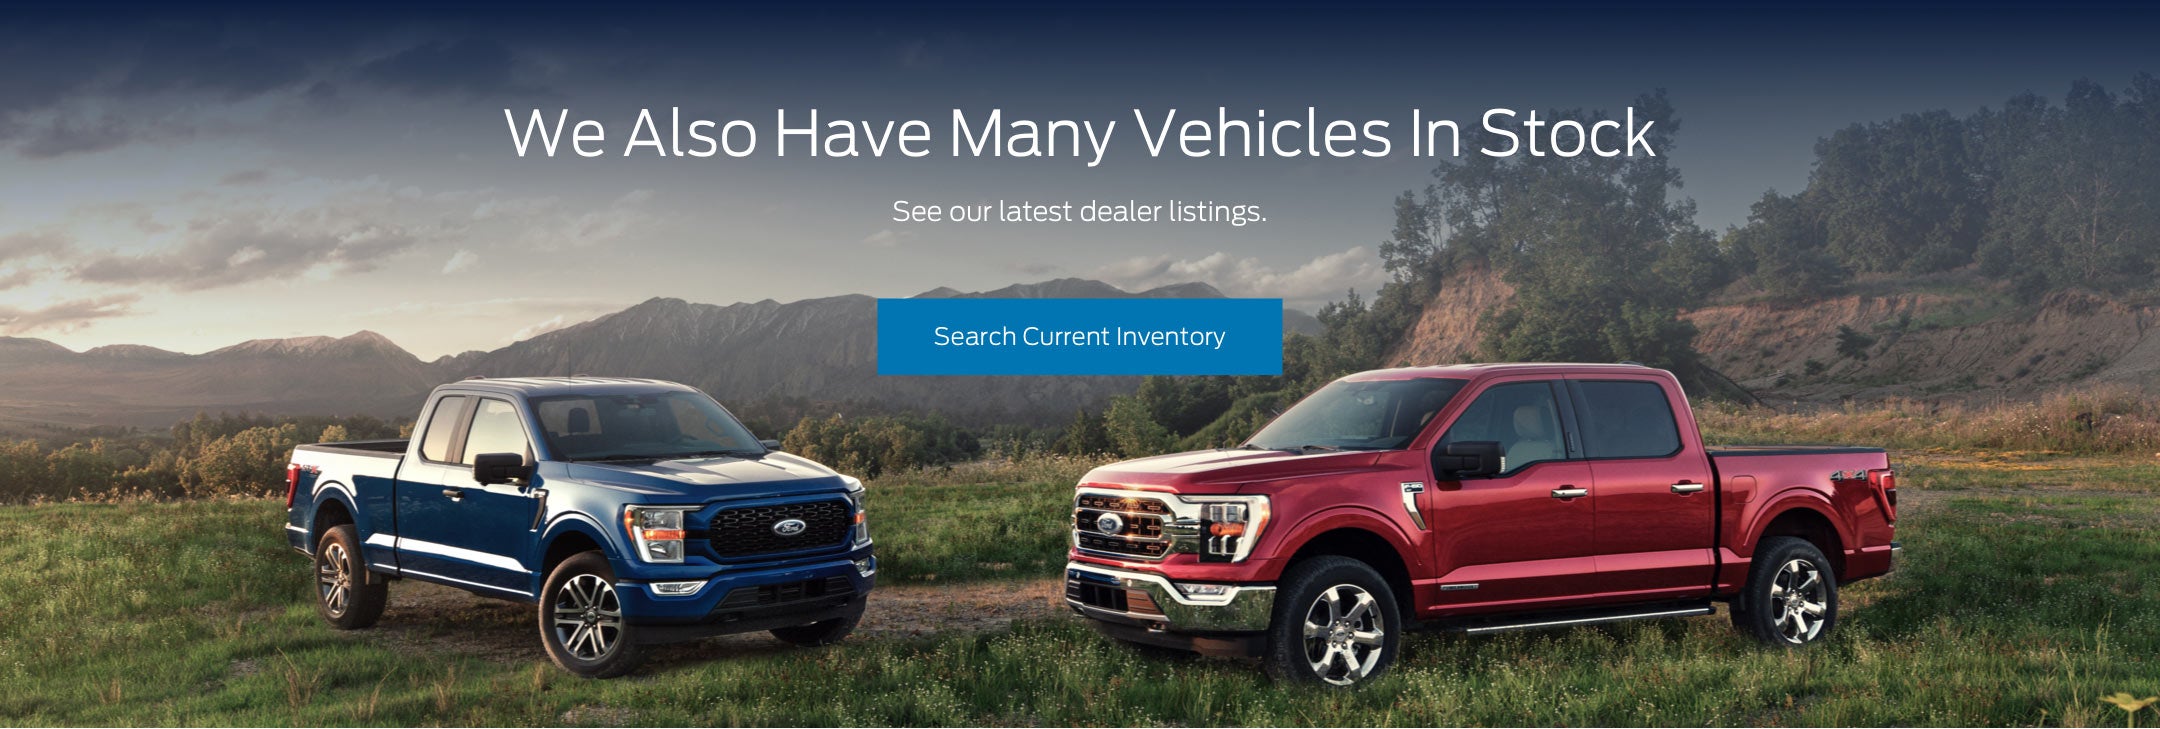 Ford vehicles in stock | Dave Sinclair Ford in St Louis MO